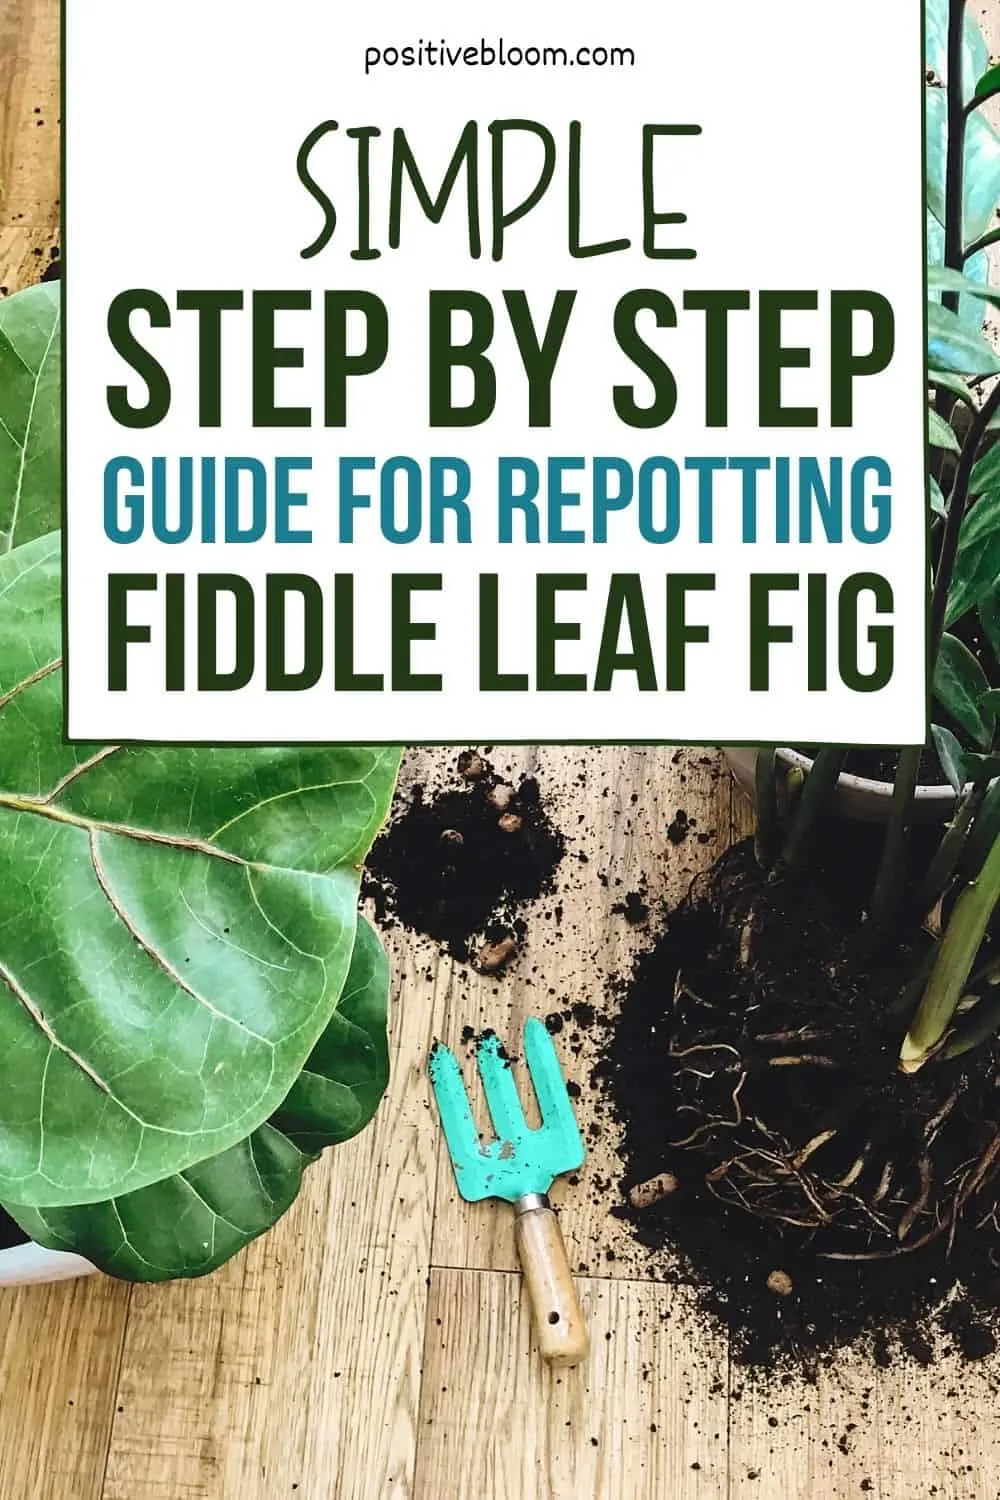 _Simple Step By Step Guide For Repotting Fiddle Leaf Fig Pinterest